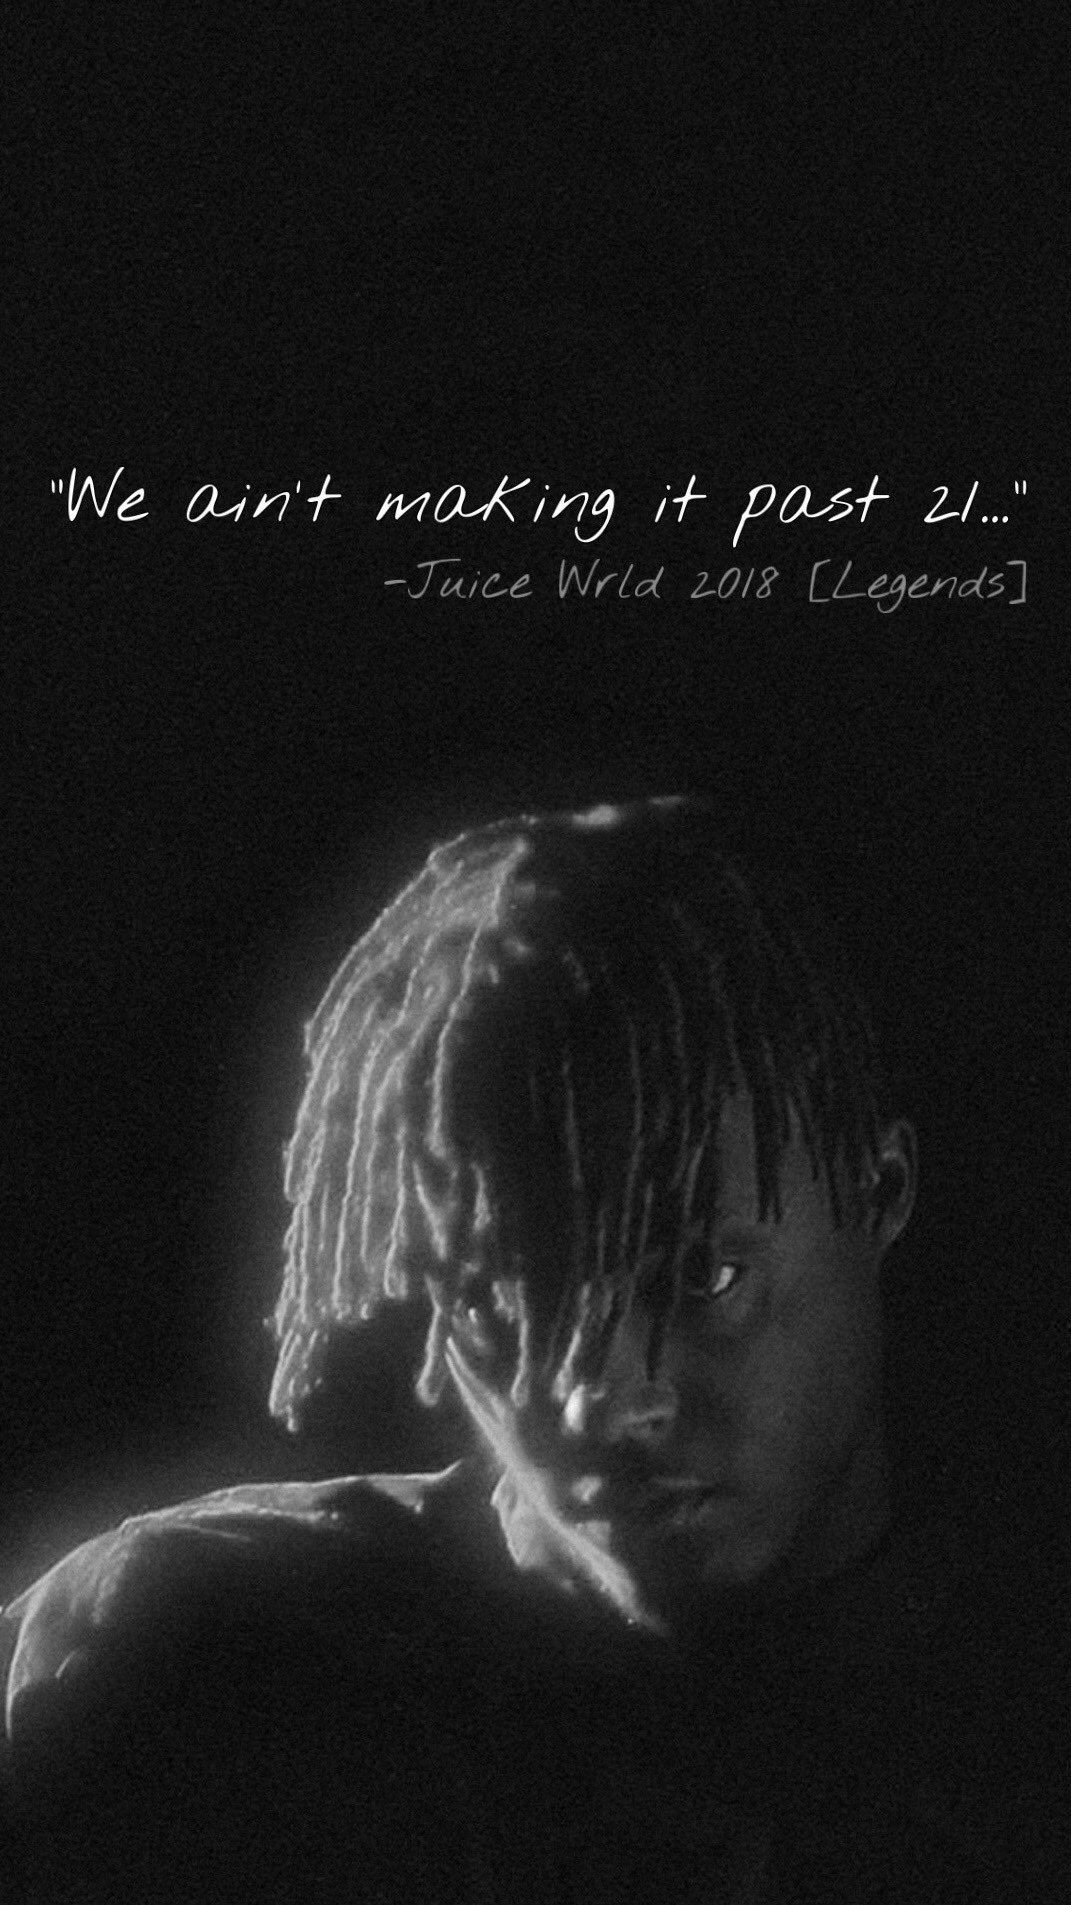 Wallpaper Daily - “All legends fall in the making” Juice WRLD. So many idols have passed in recent years and it's so sad but also amazing to see what impact they